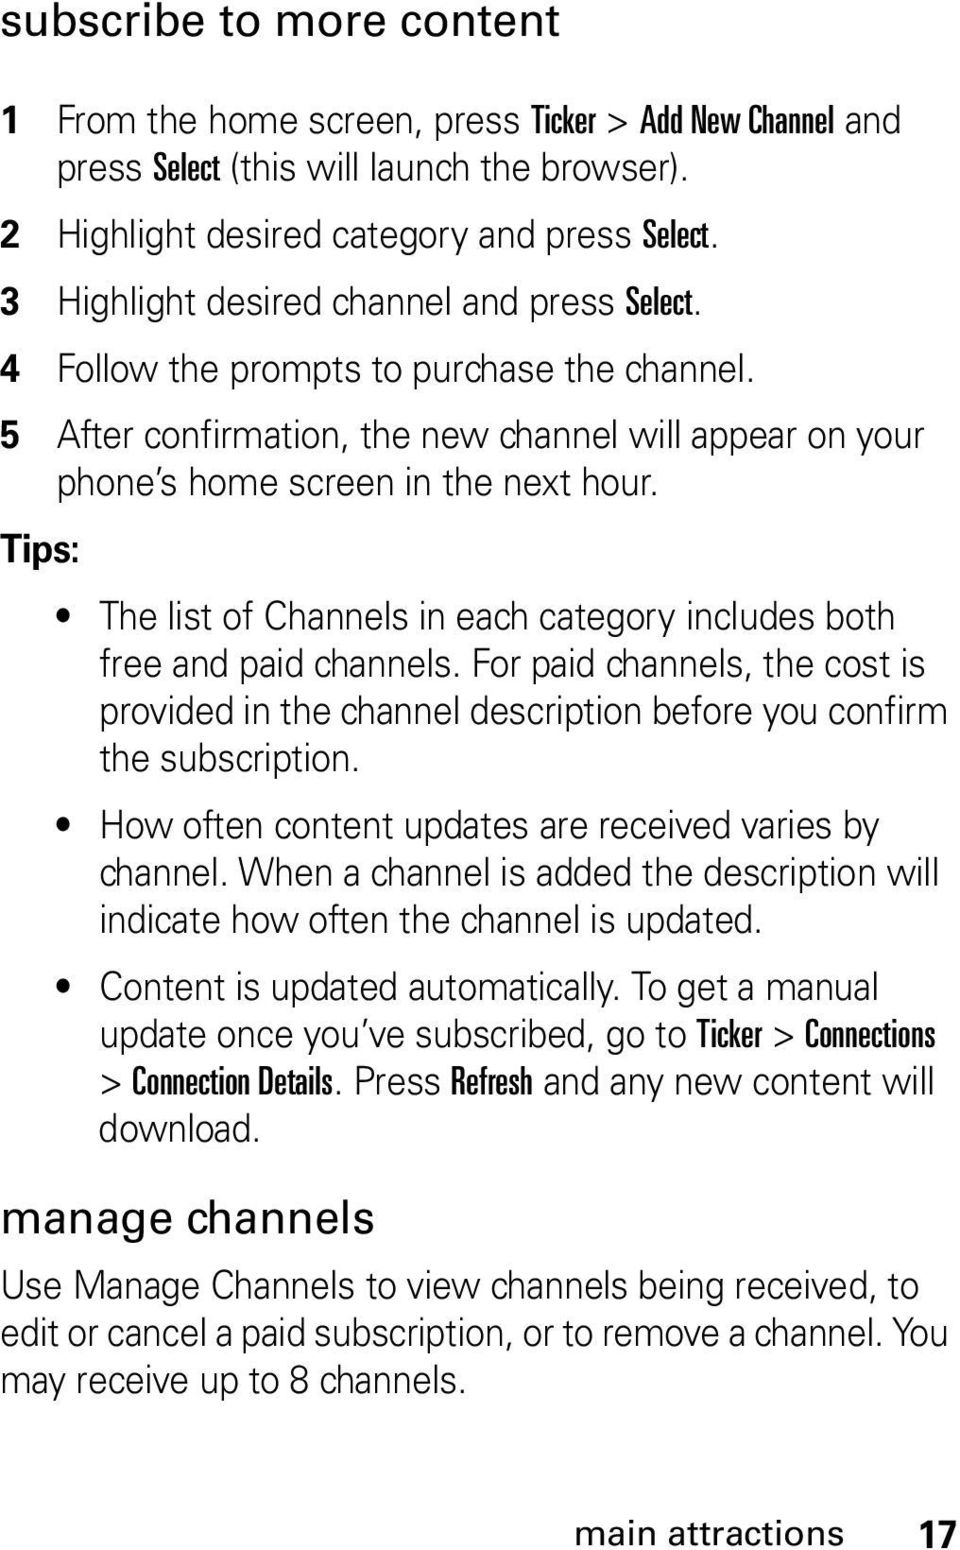 Tips: The list of Channels in each category includes both free and paid channels. For paid channels, the cost is provided in the channel description before you confirm the subscription.